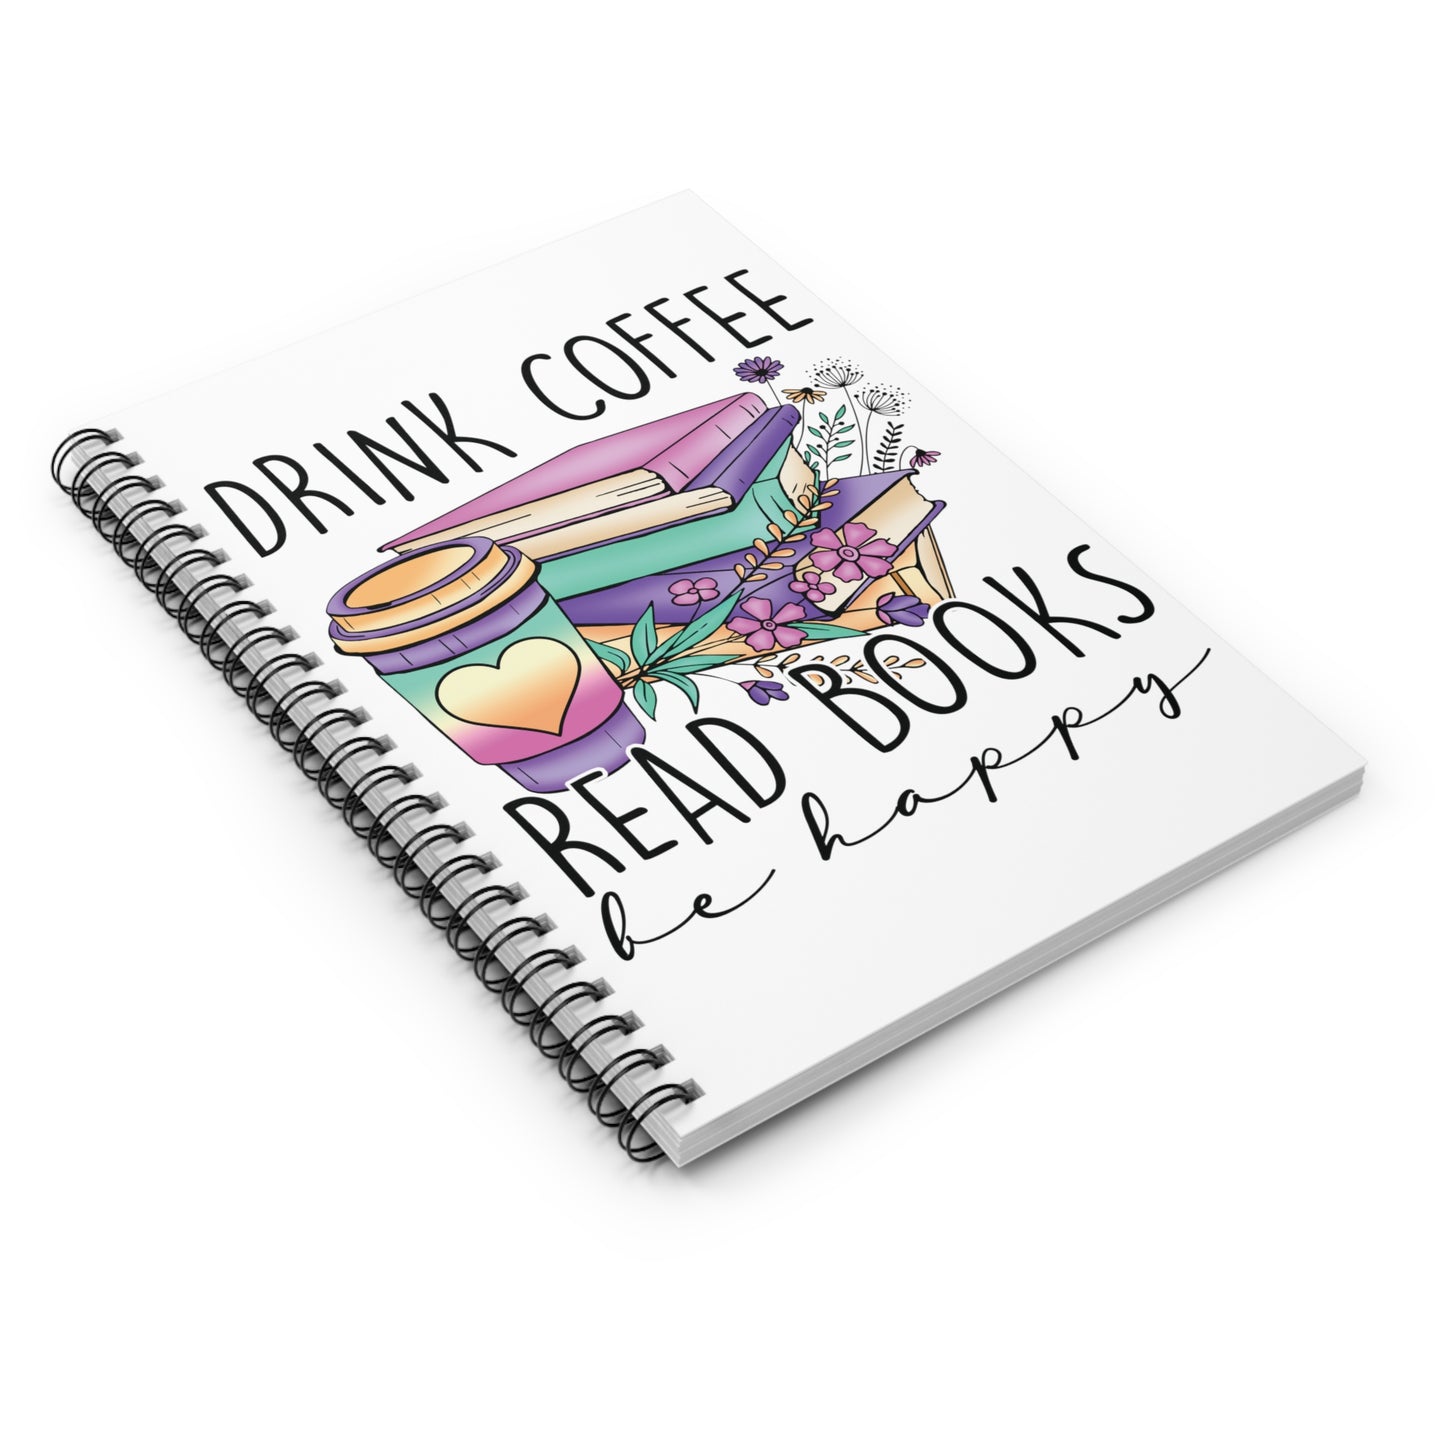 Drink Coffee Read Books Be Happy: Spiral Notebook - Log Books - Journals - Diaries - and More Custom Printed by TheGlassyLass